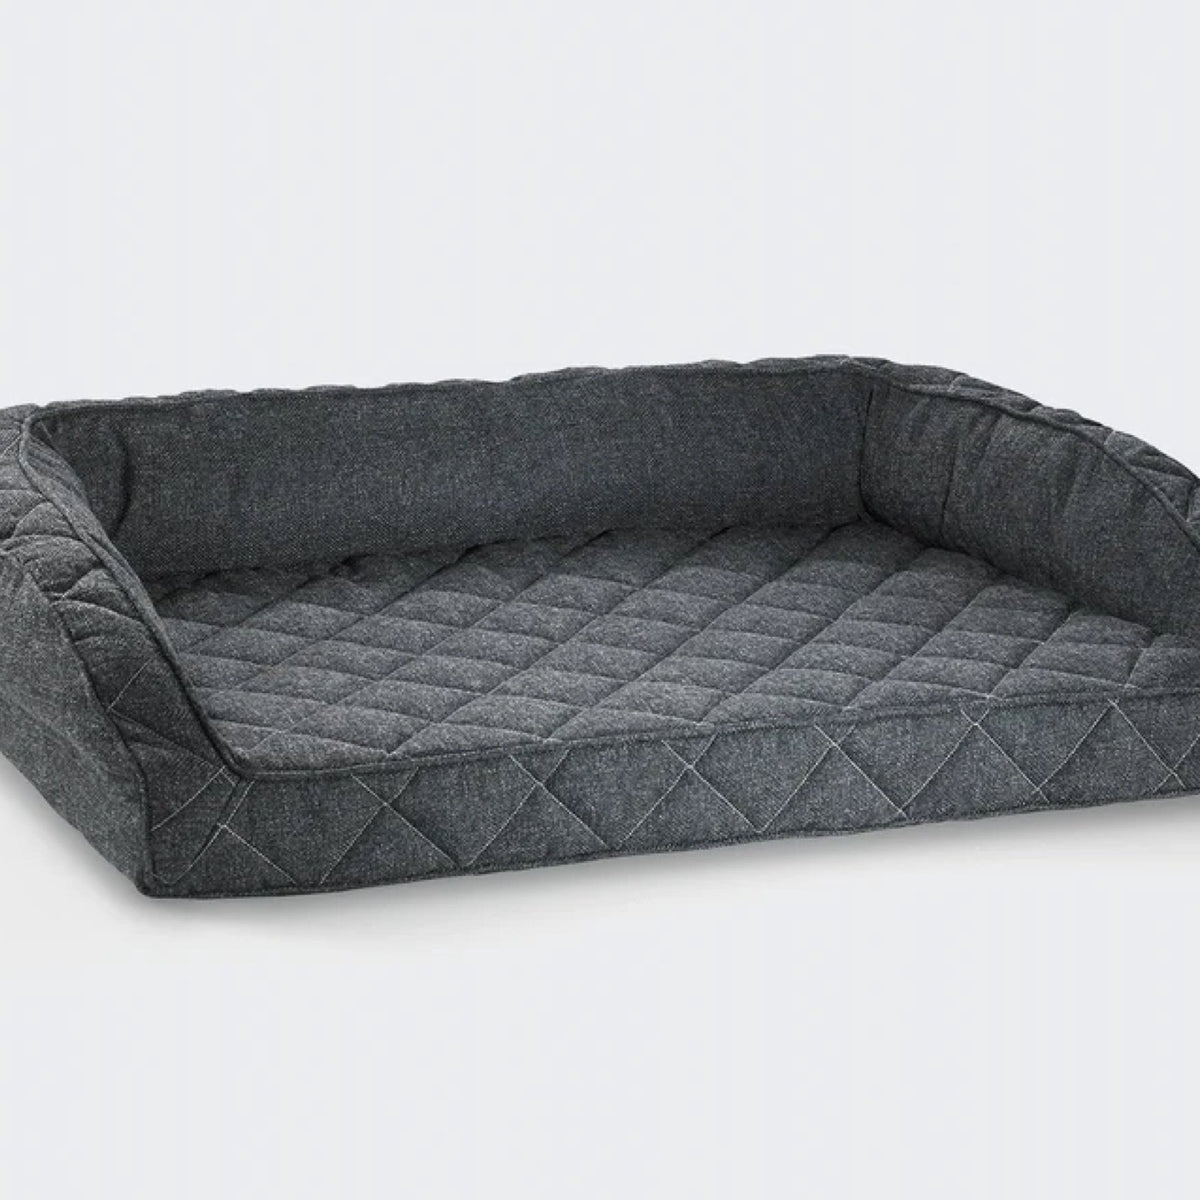 Runyon Dog Bed Replacement Cover